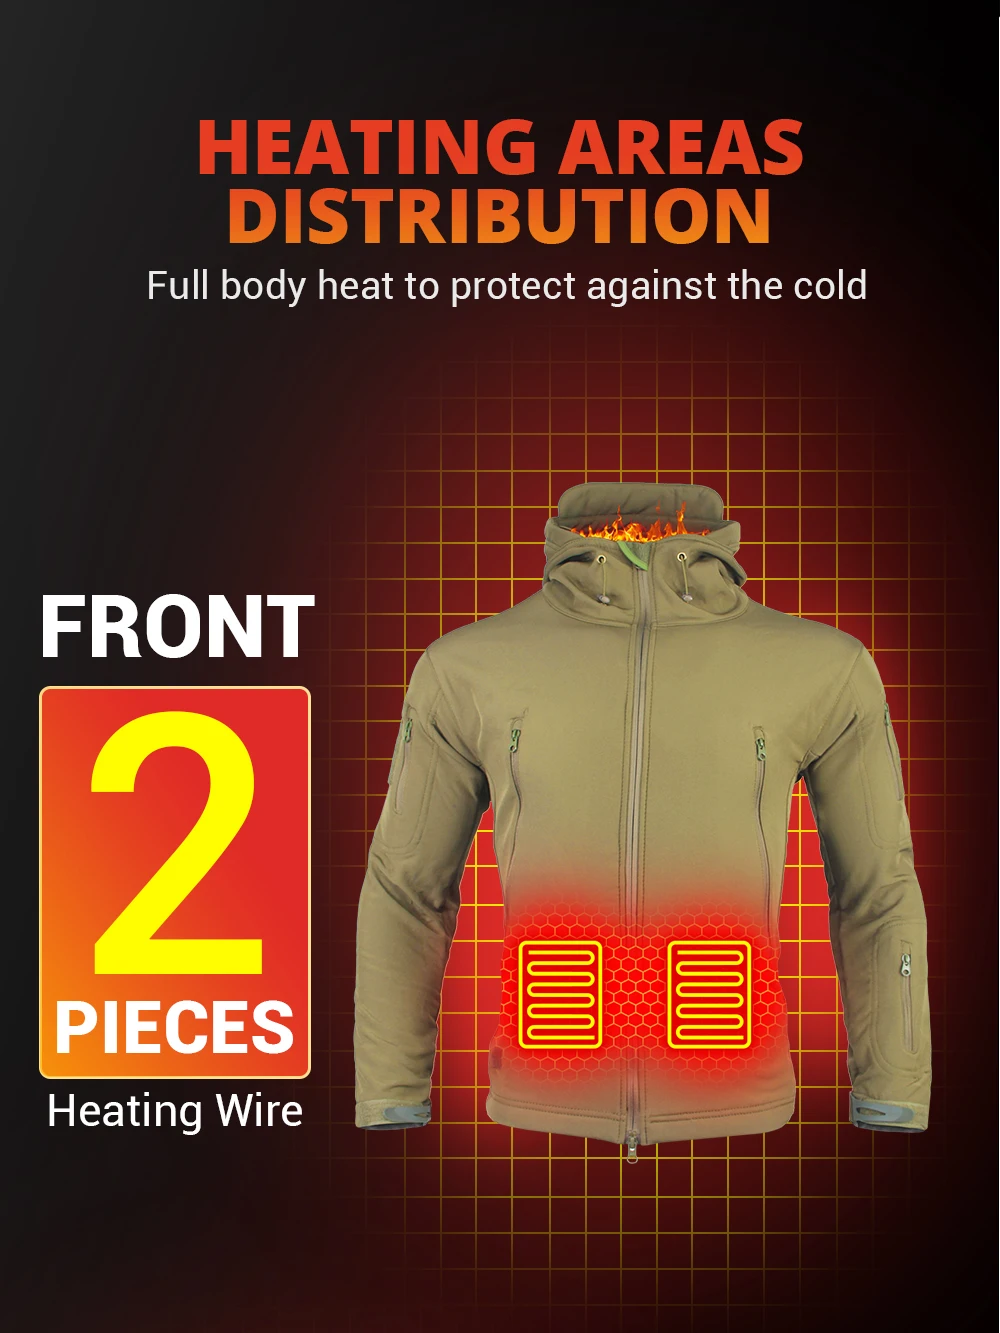 A Smart Heated Jacket featuring ultra-thin heating panels and pocket temperature controls.